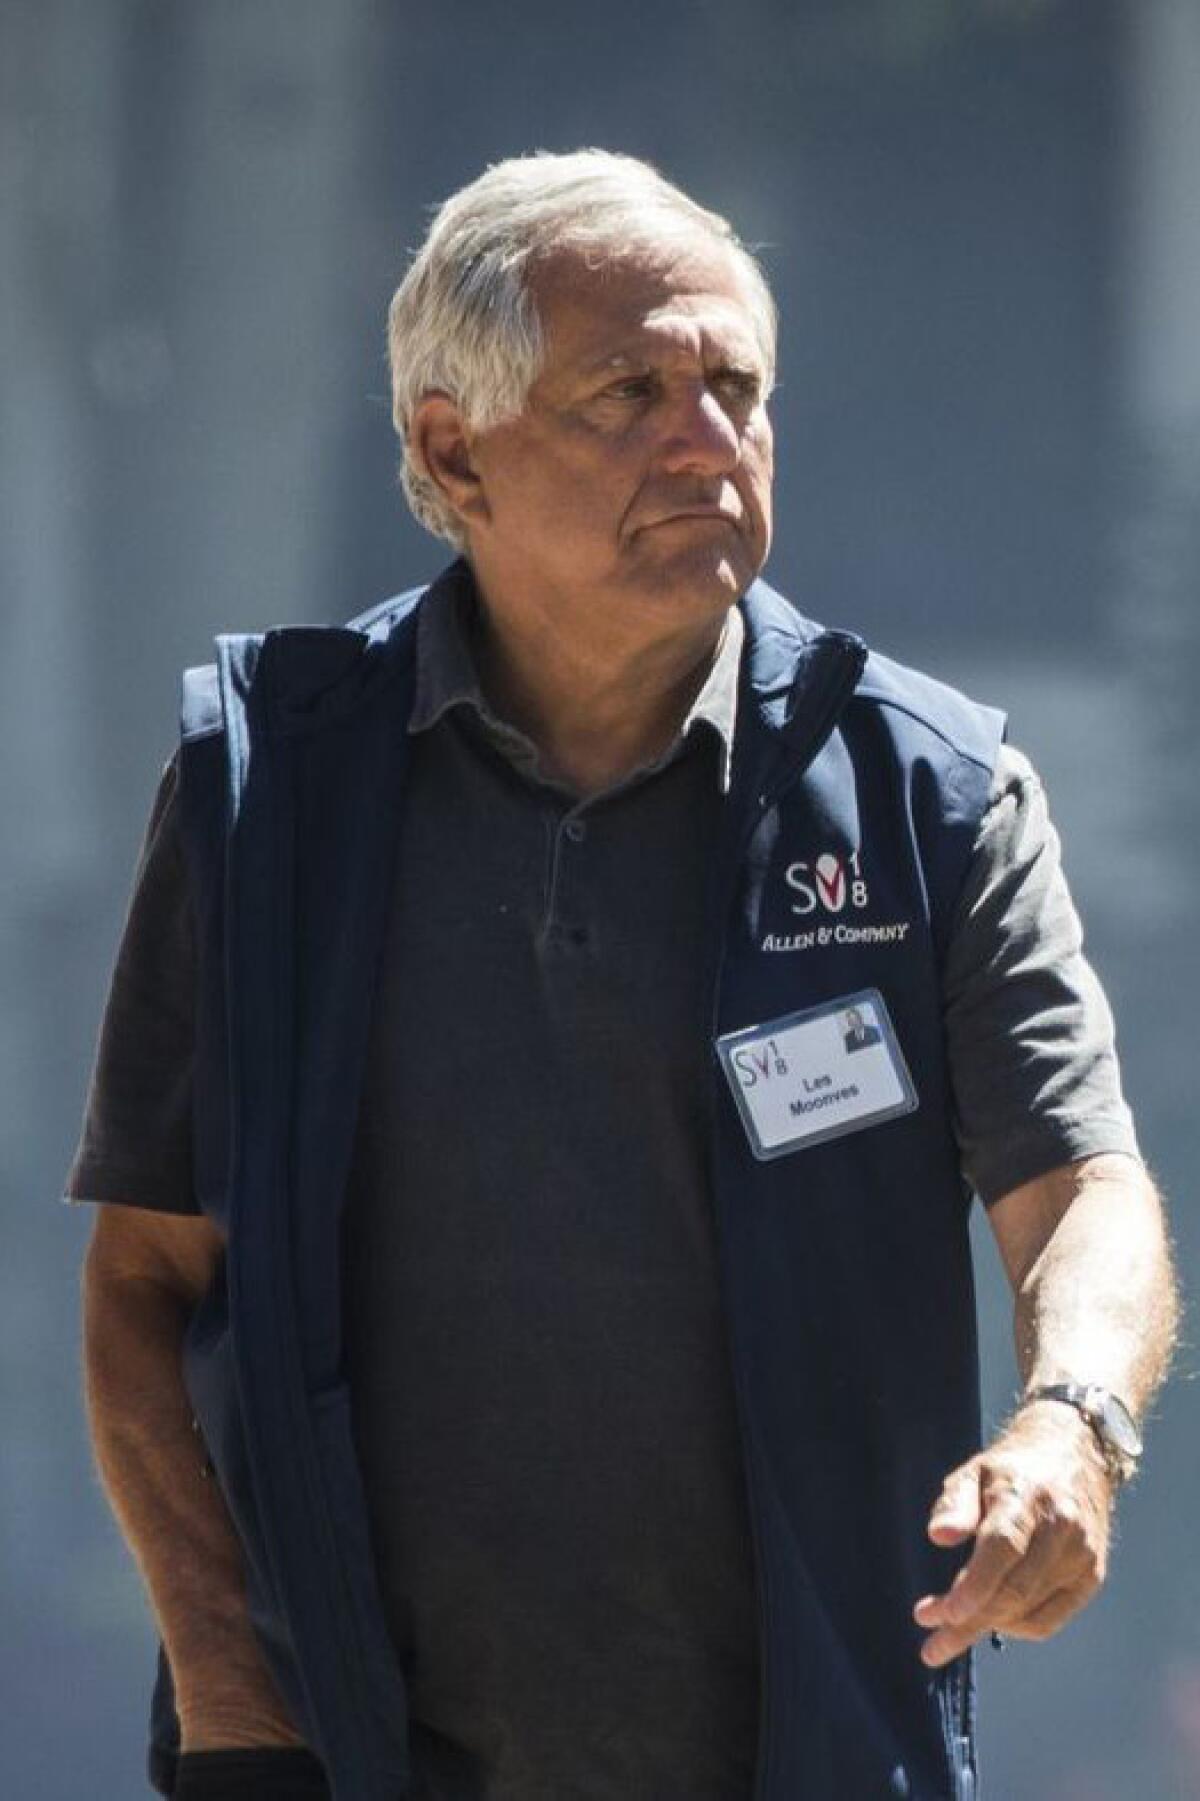 Former CBS chief Leslie Moonves to pay $11,250 fine to settle L.A. ethics case